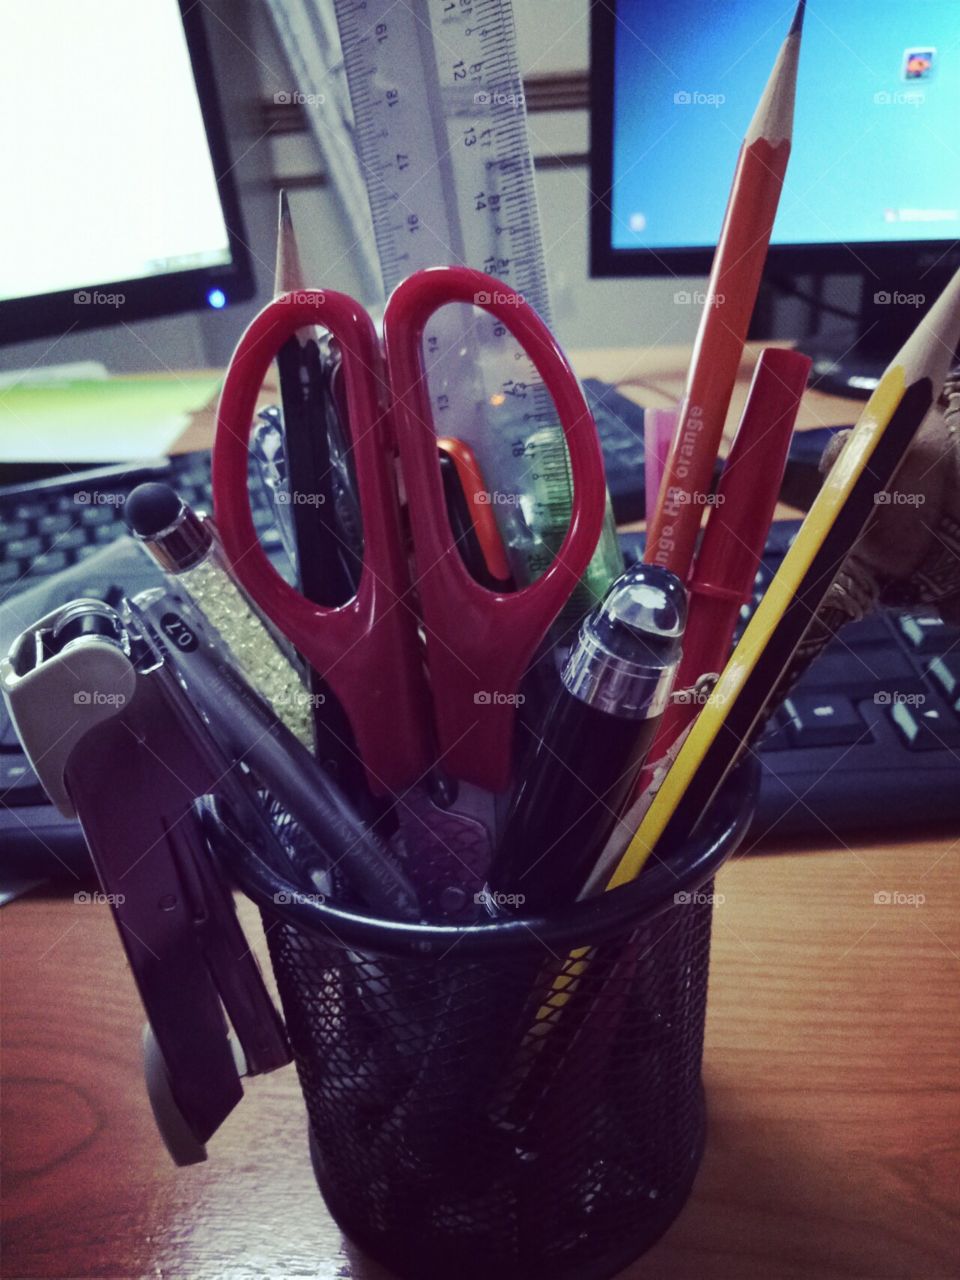 bouquet of pencils and pen in workstation